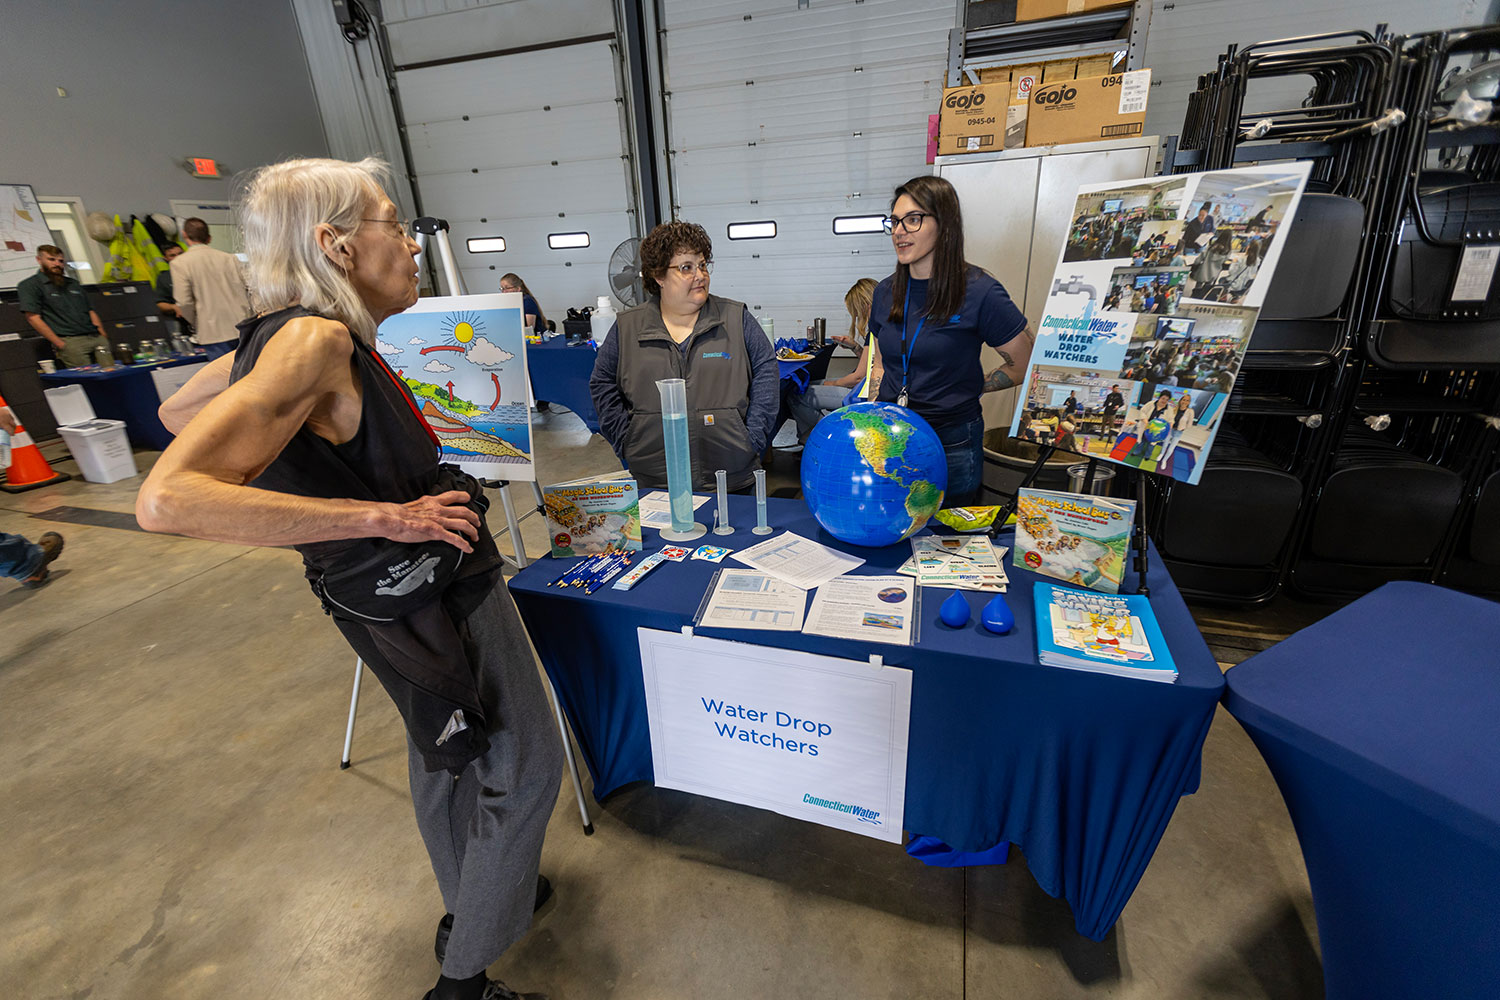 Photos of the Connecticut Water open house in Clinton